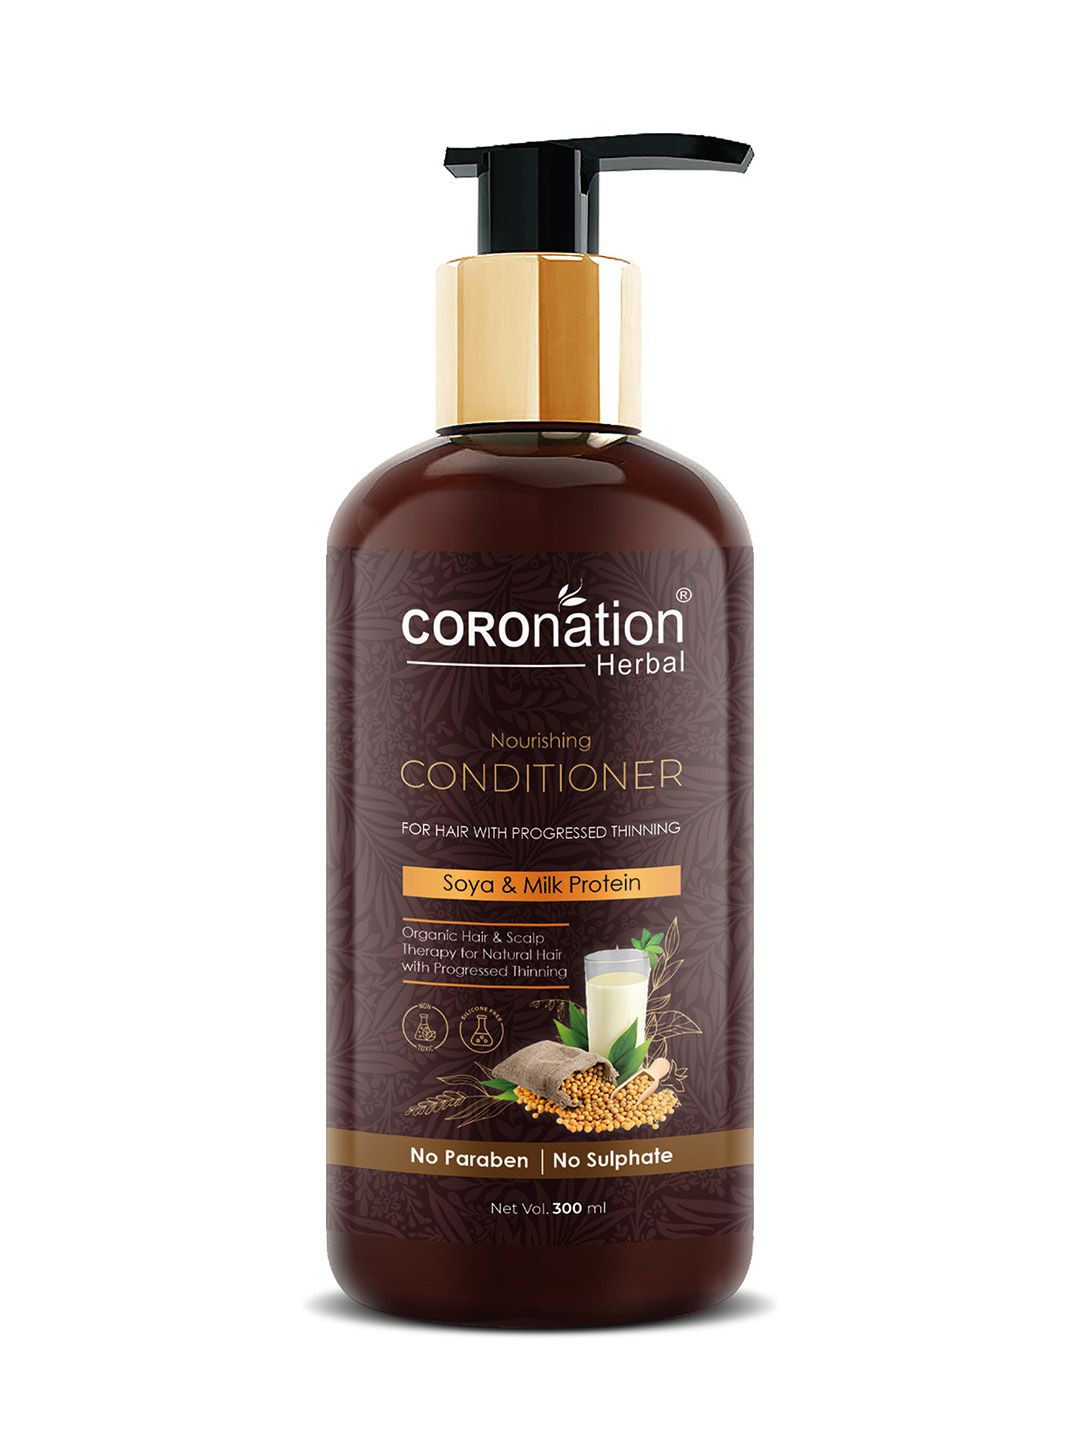 COROnation Herbal Nourishing Conditioner with Soya & Milk Protein 300 ml Price in India